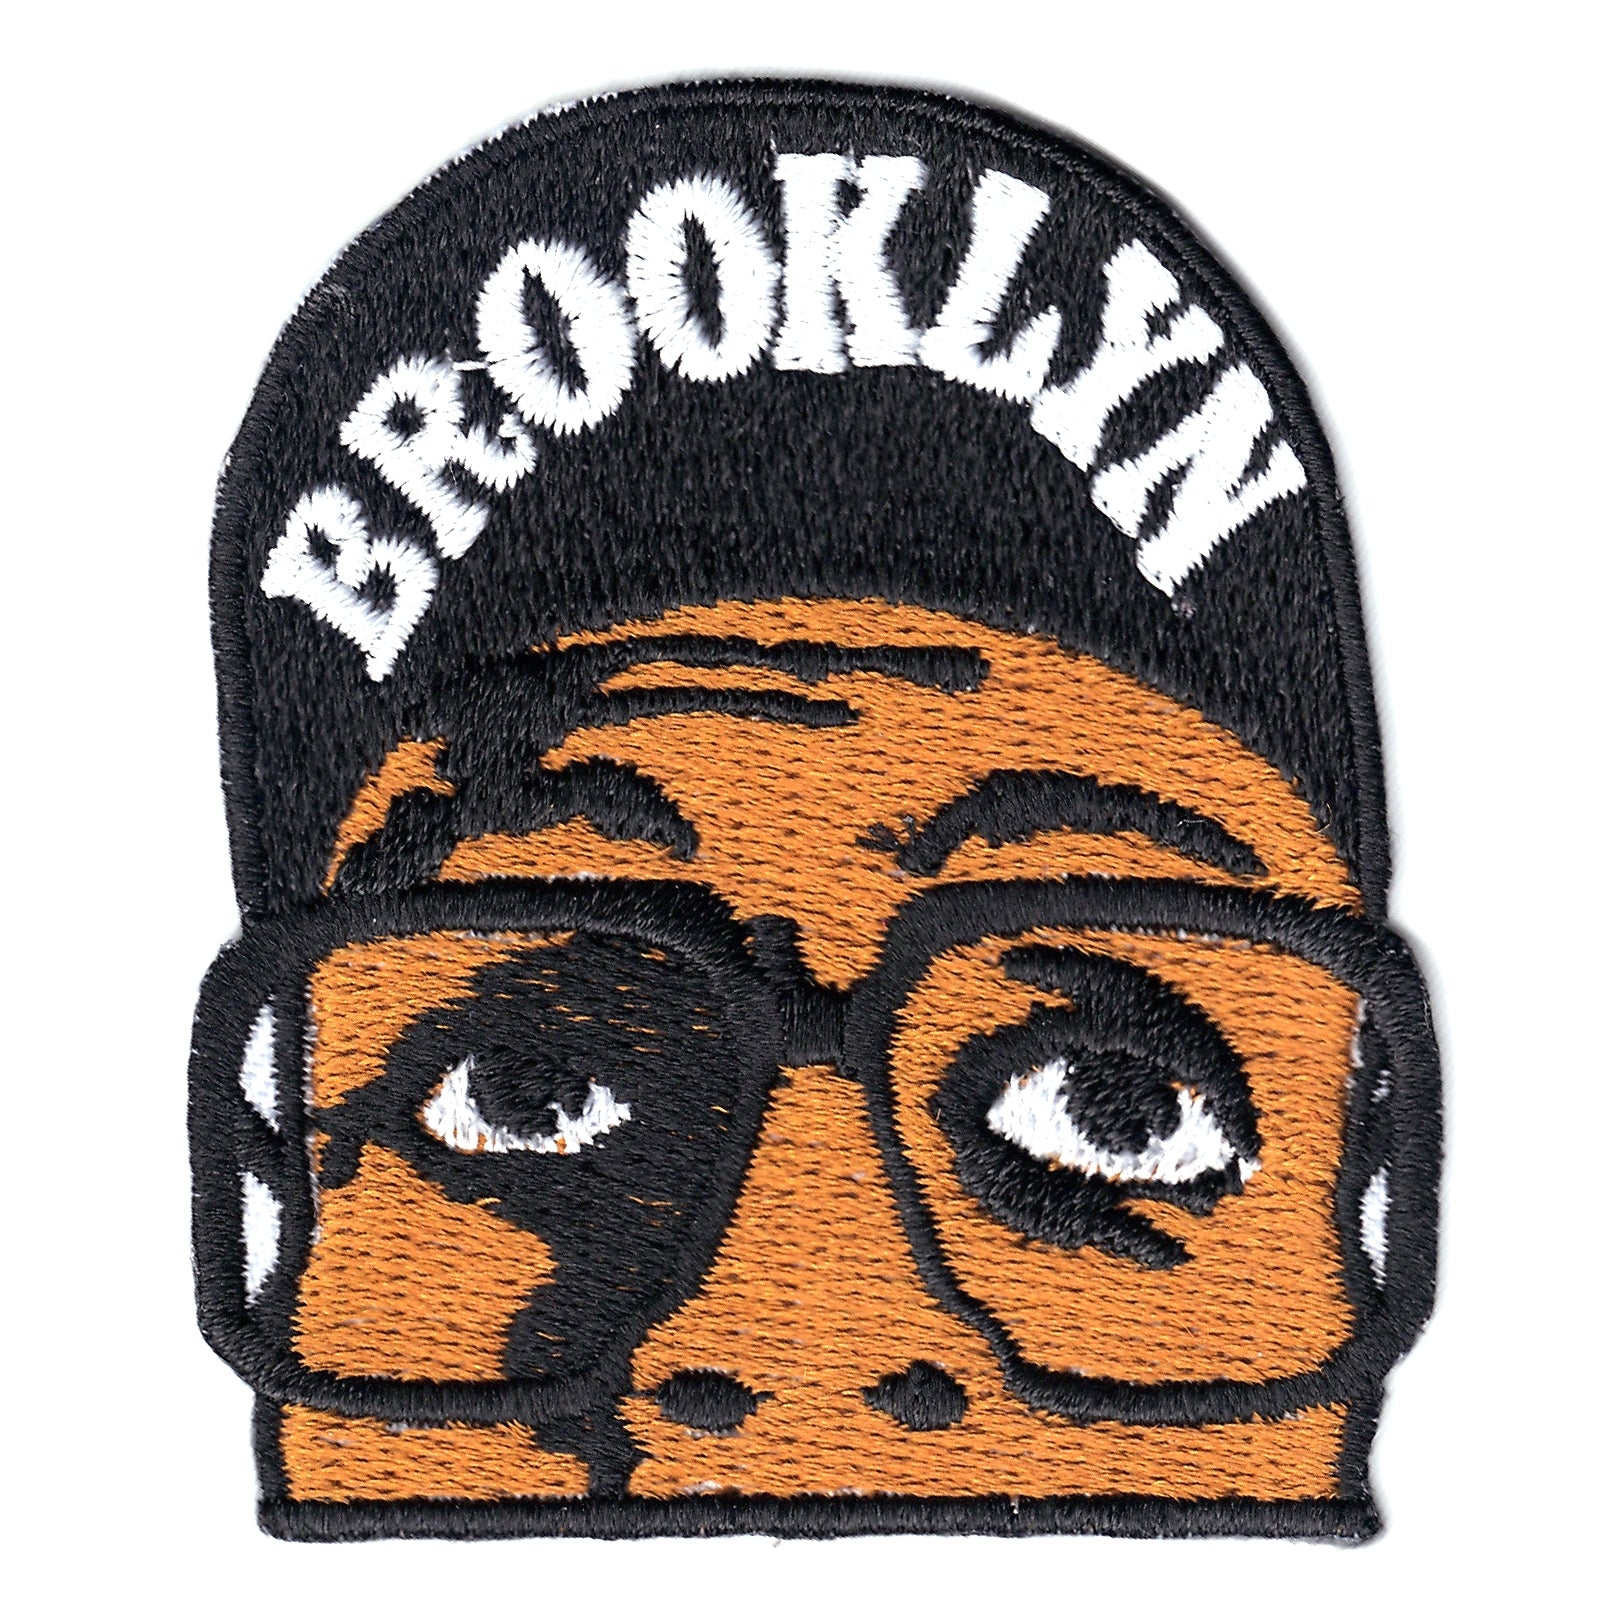 Brooklyn Basketball Player Iron on Patch 